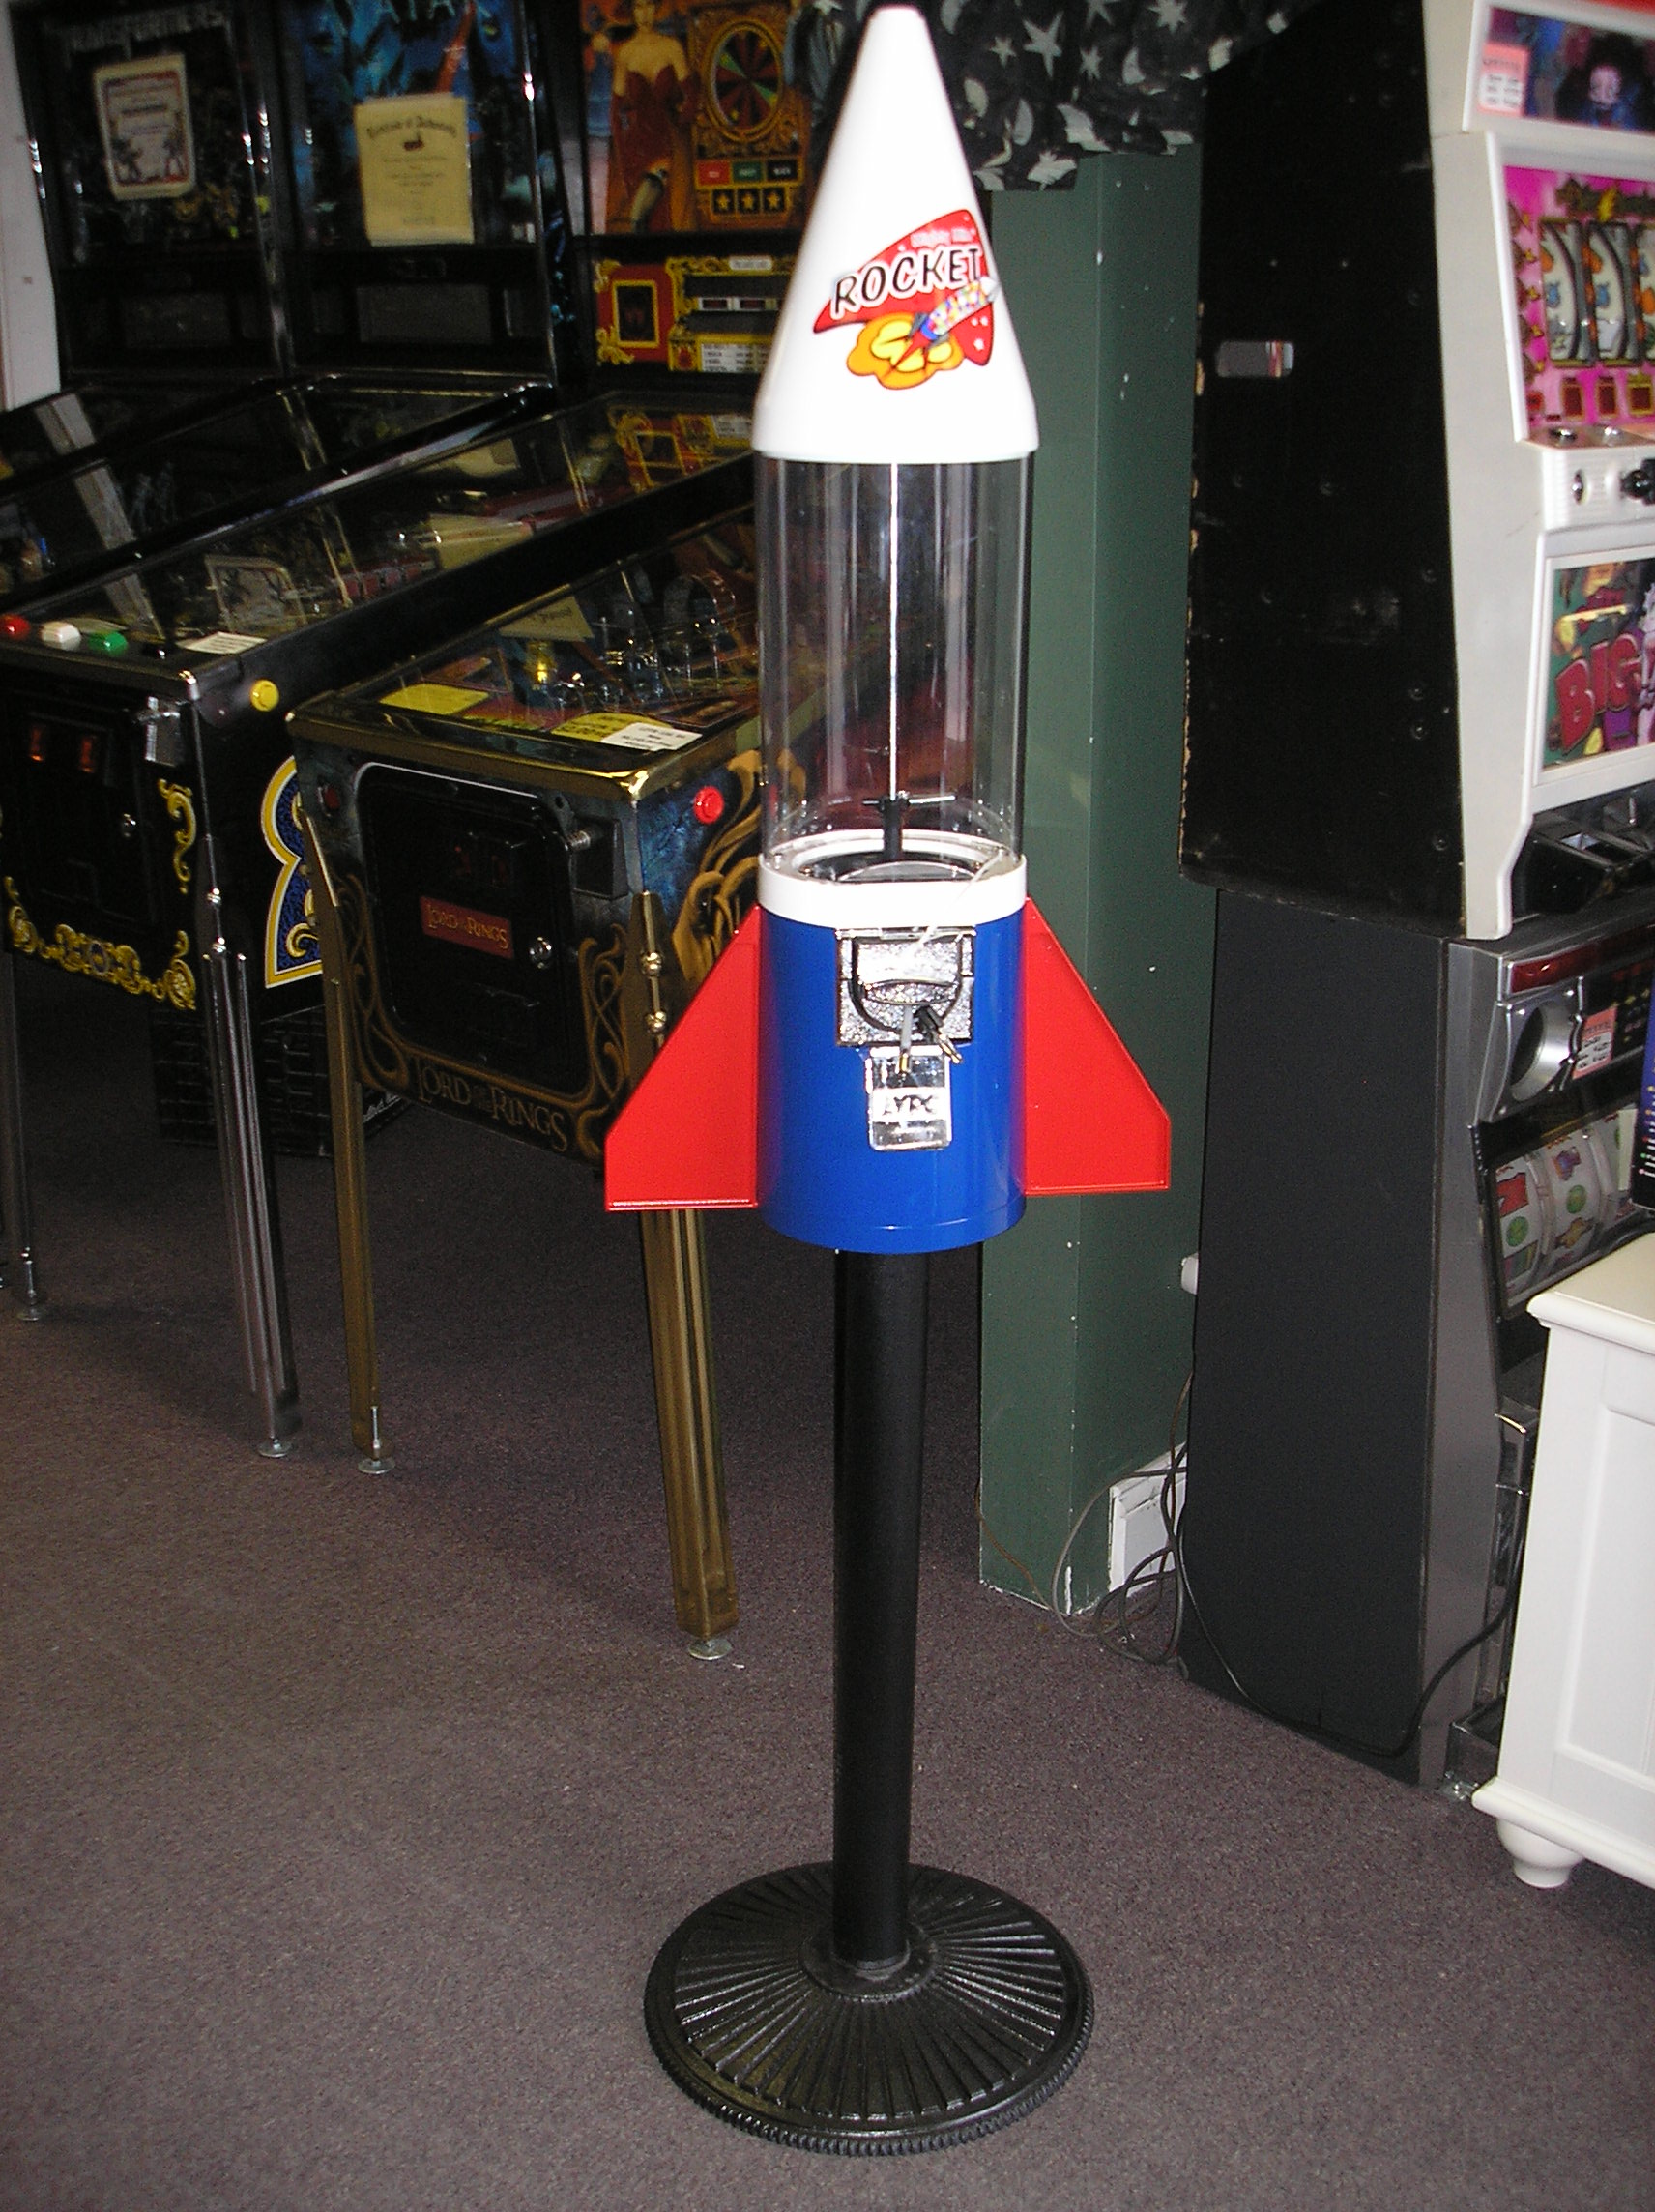 MIGHTY MITE Rocket Gumball Machine for sale - Vend Gumballs/Super Balls/Capsules ...1712 x 2288